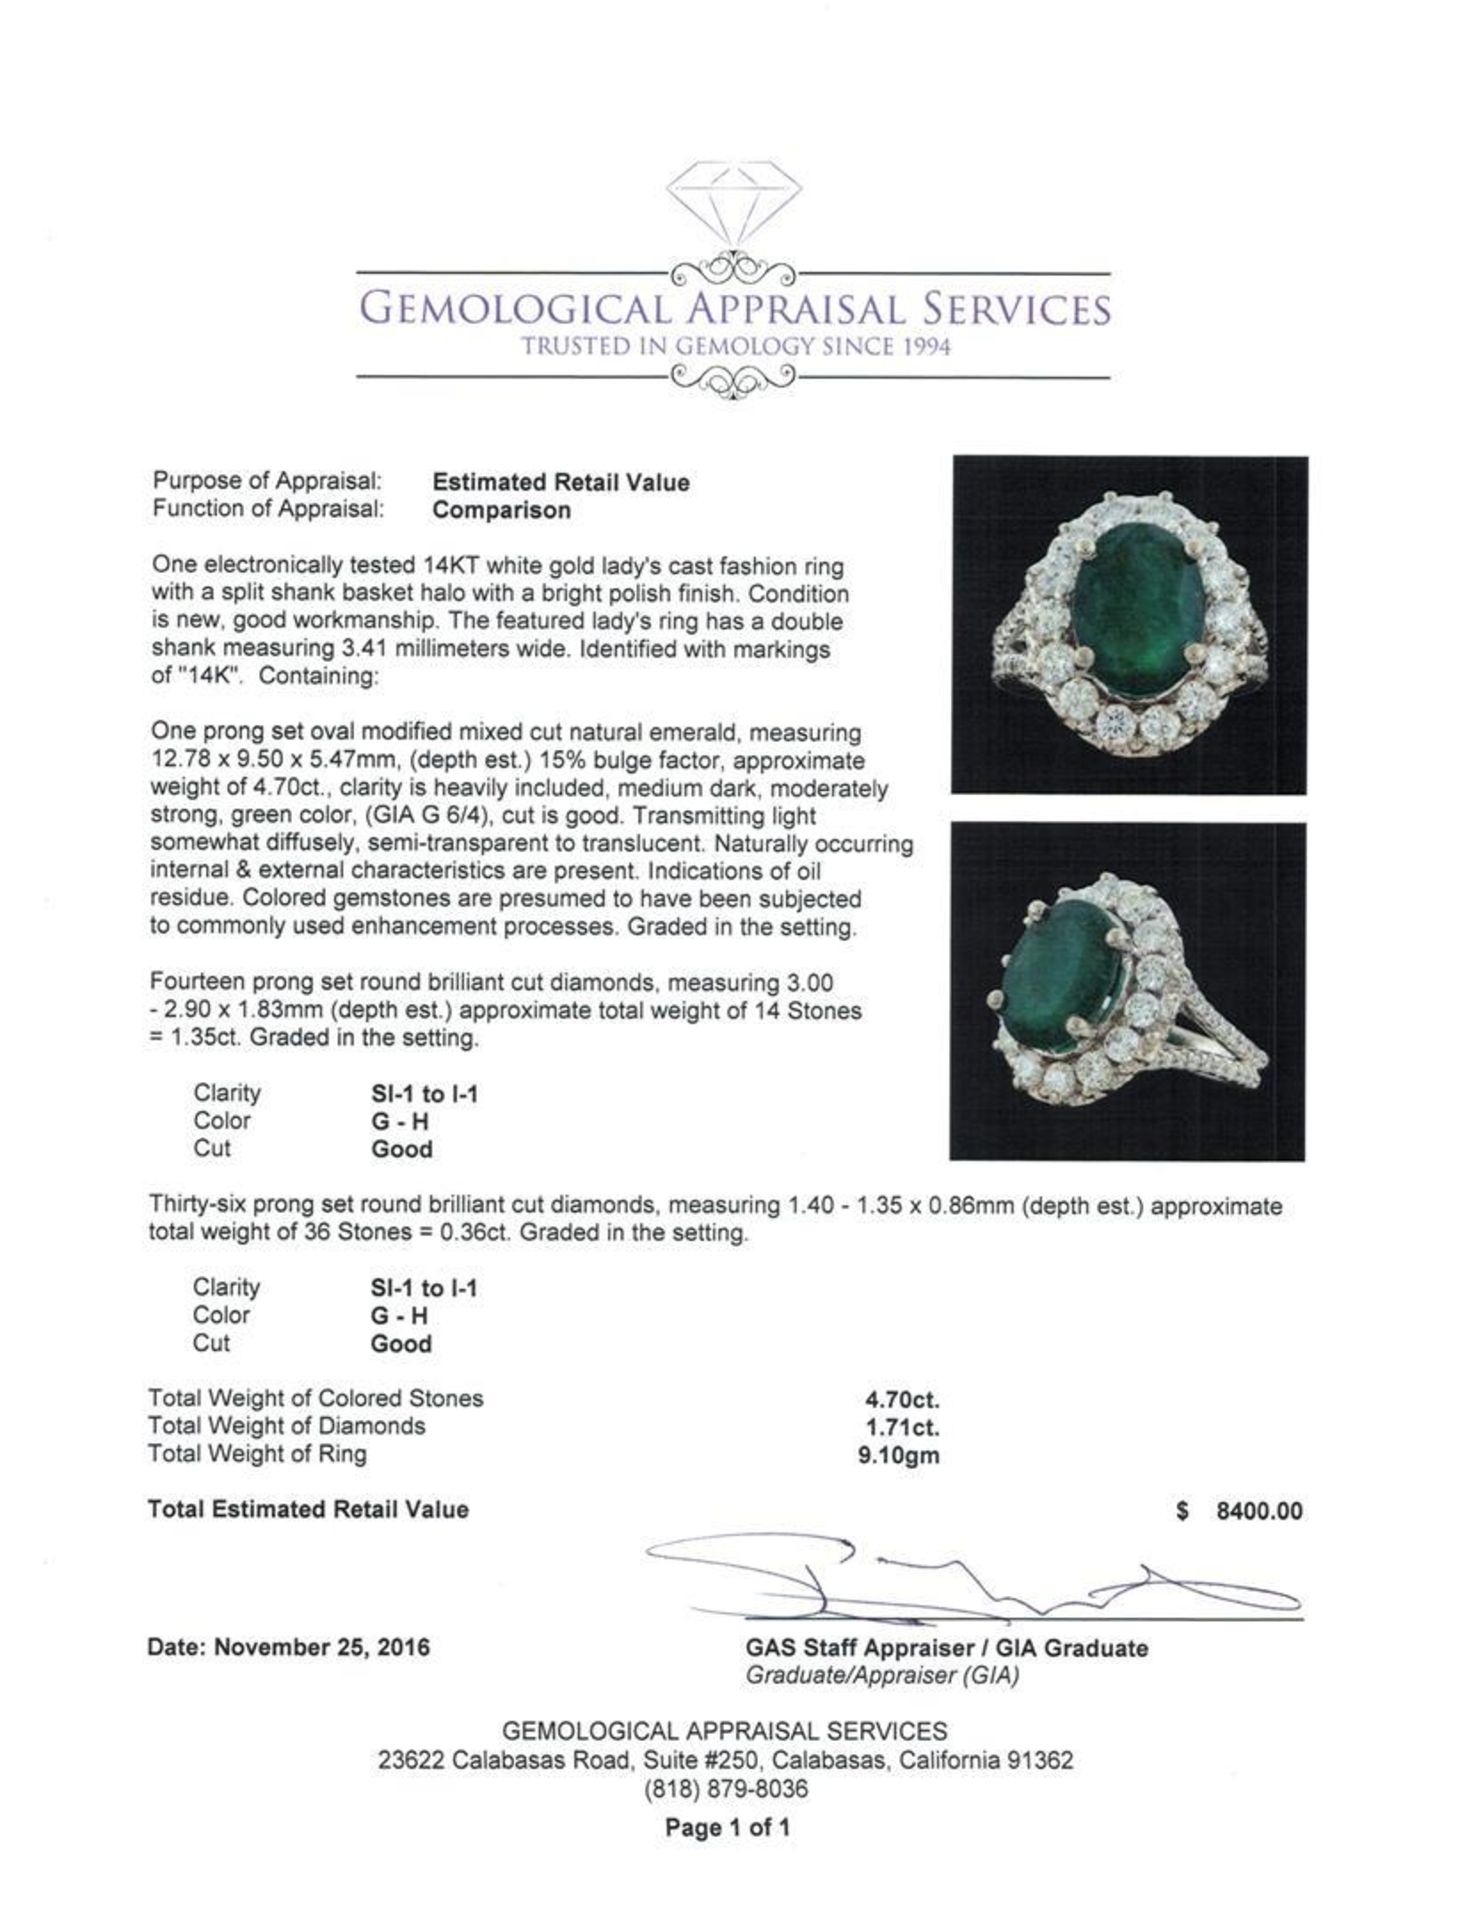 4.70 ctw Emerald and Diamond Ring - 14KT White Gold - Image 5 of 5